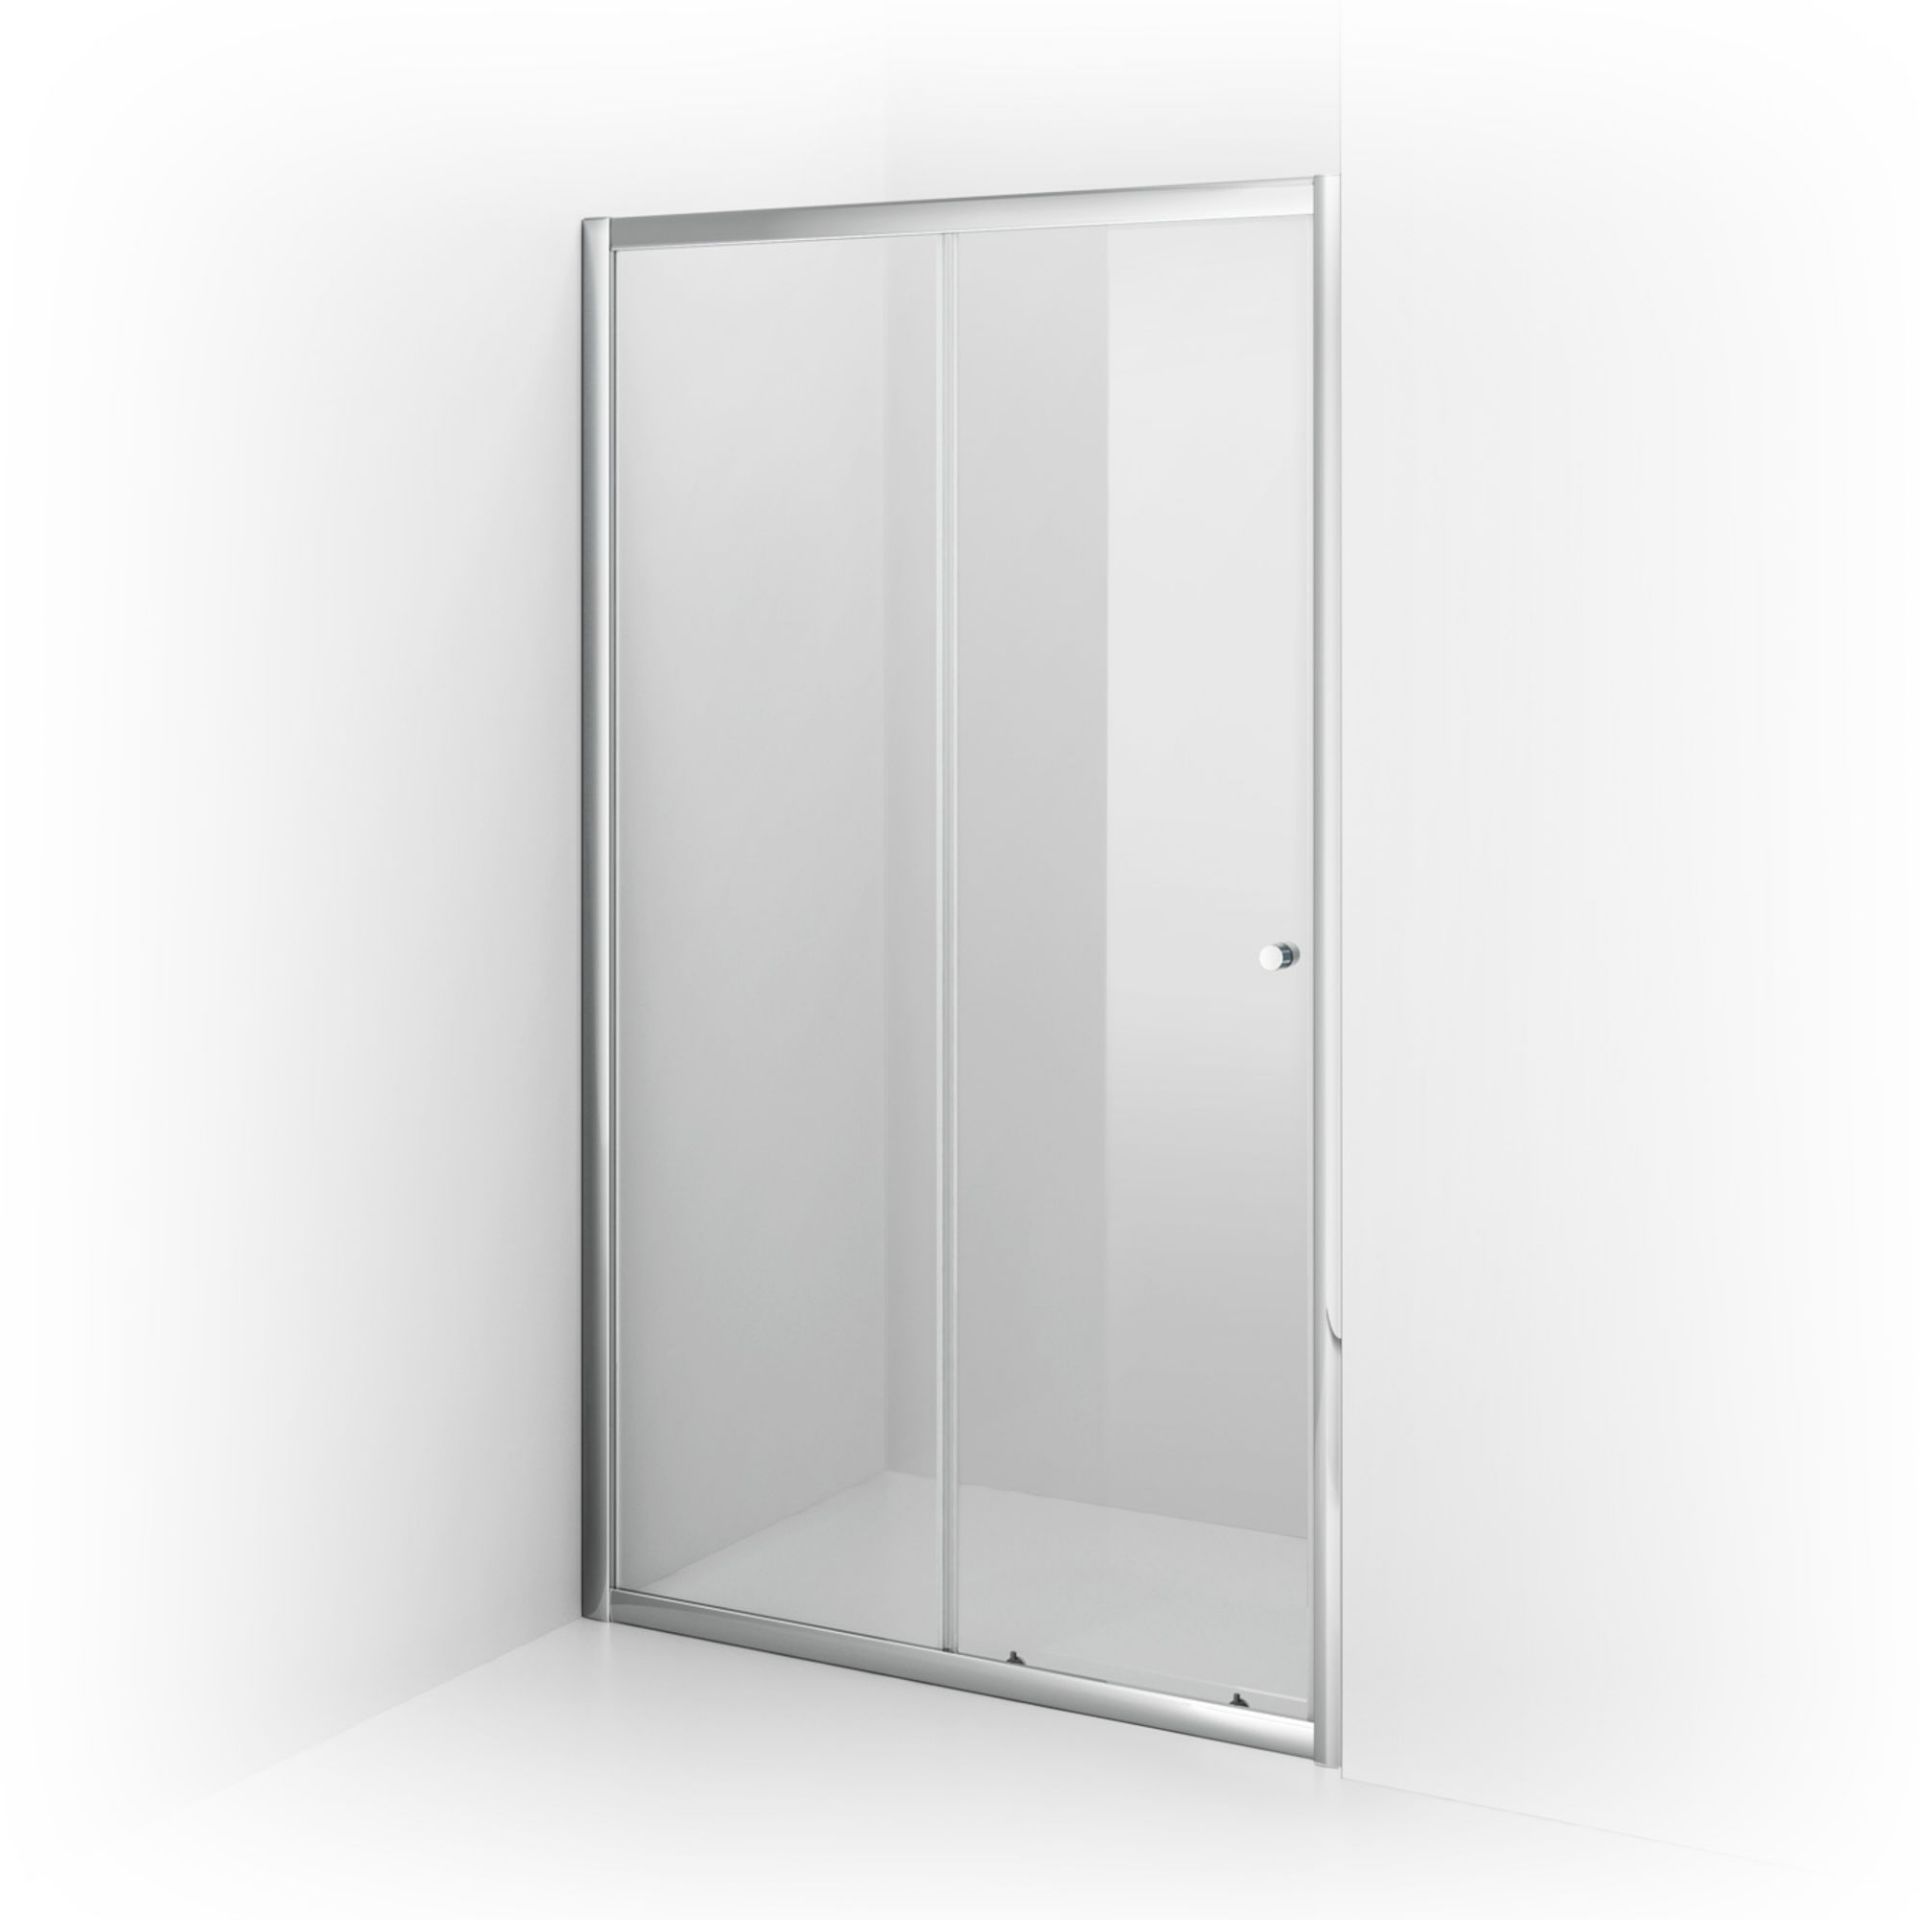 (CS197) 1000mm - Elements Sliding Shower Door. RRP £249.99. 4mm Safety Glass Fully waterproof tested - Image 5 of 5